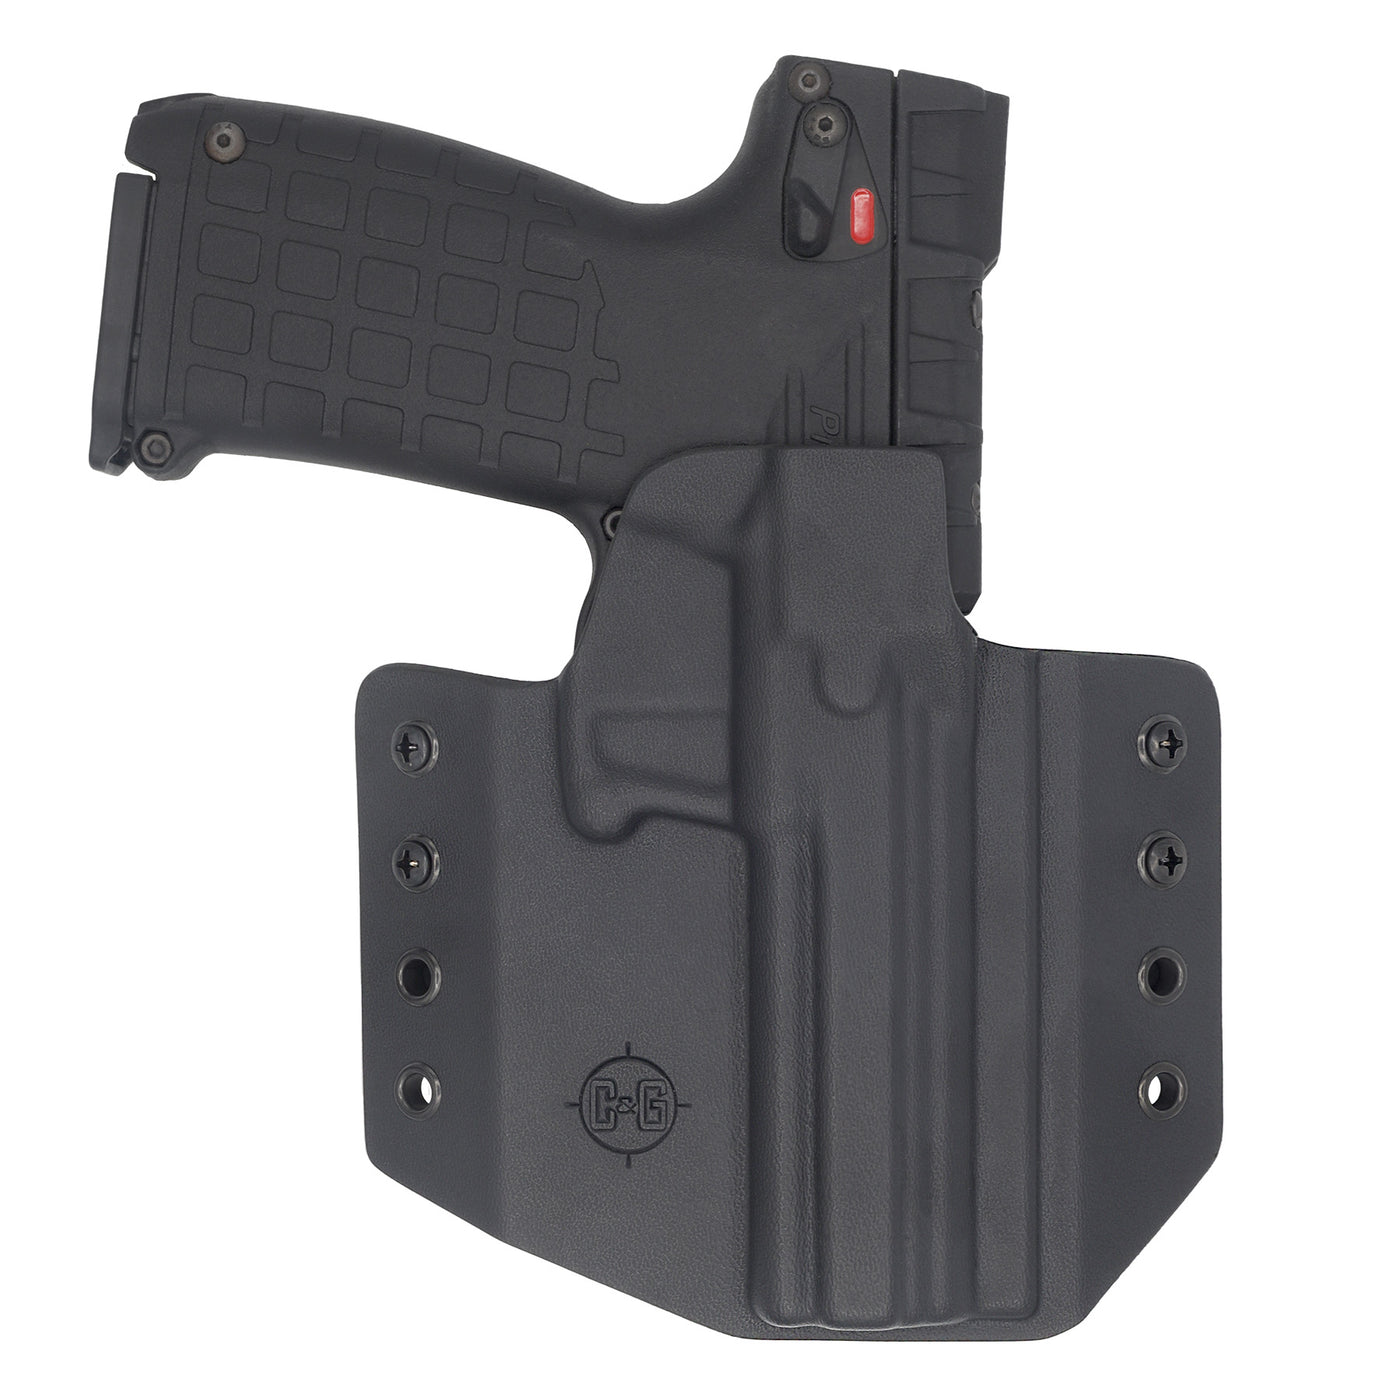 The custom C&G Holsters Outside the waistband for the Kel-Tec PMR-30.